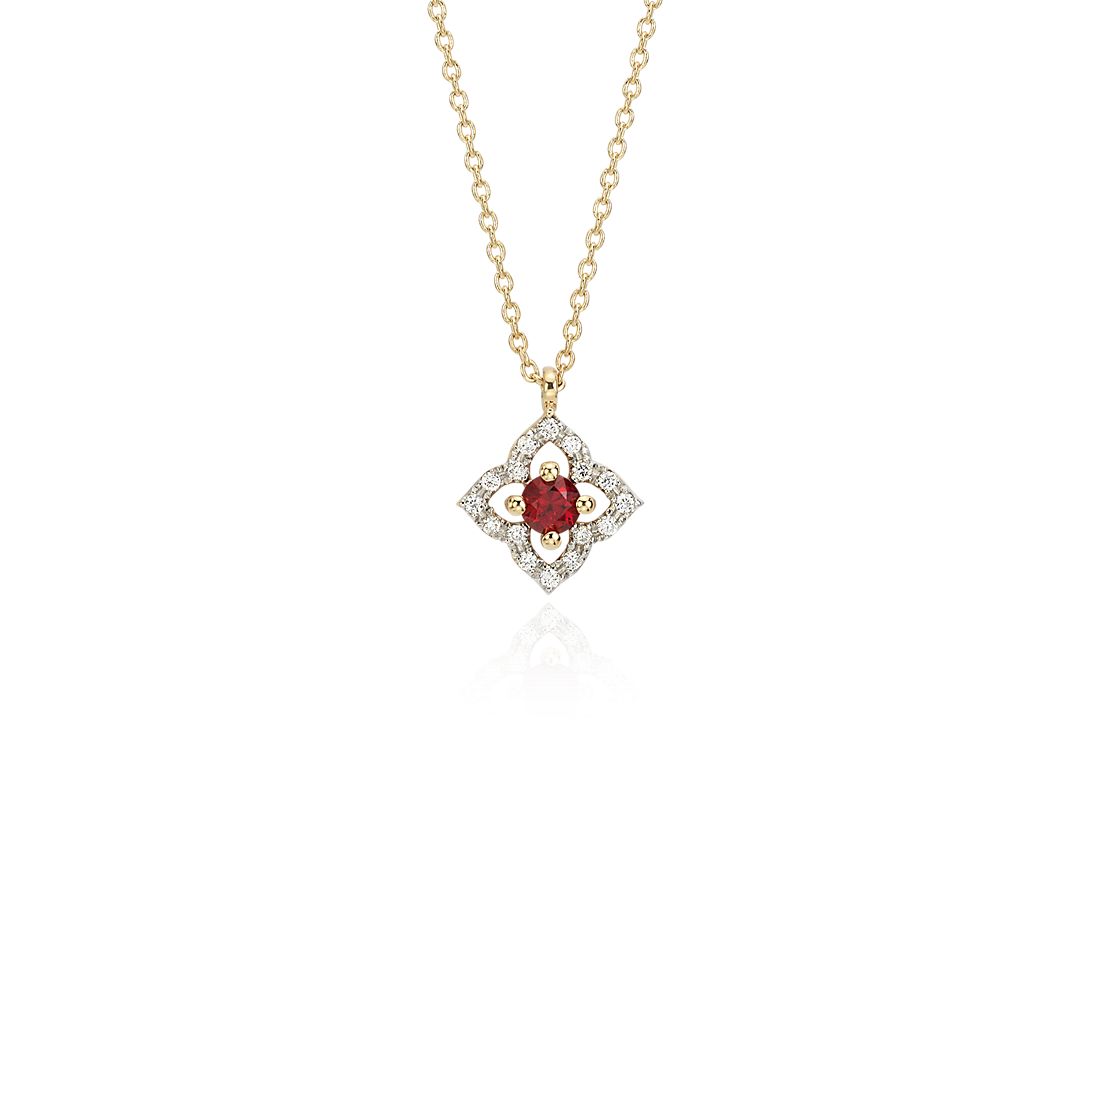 Petite Ruby Floral Pendant Necklace in 14k Yellow Gold (2.8mm)